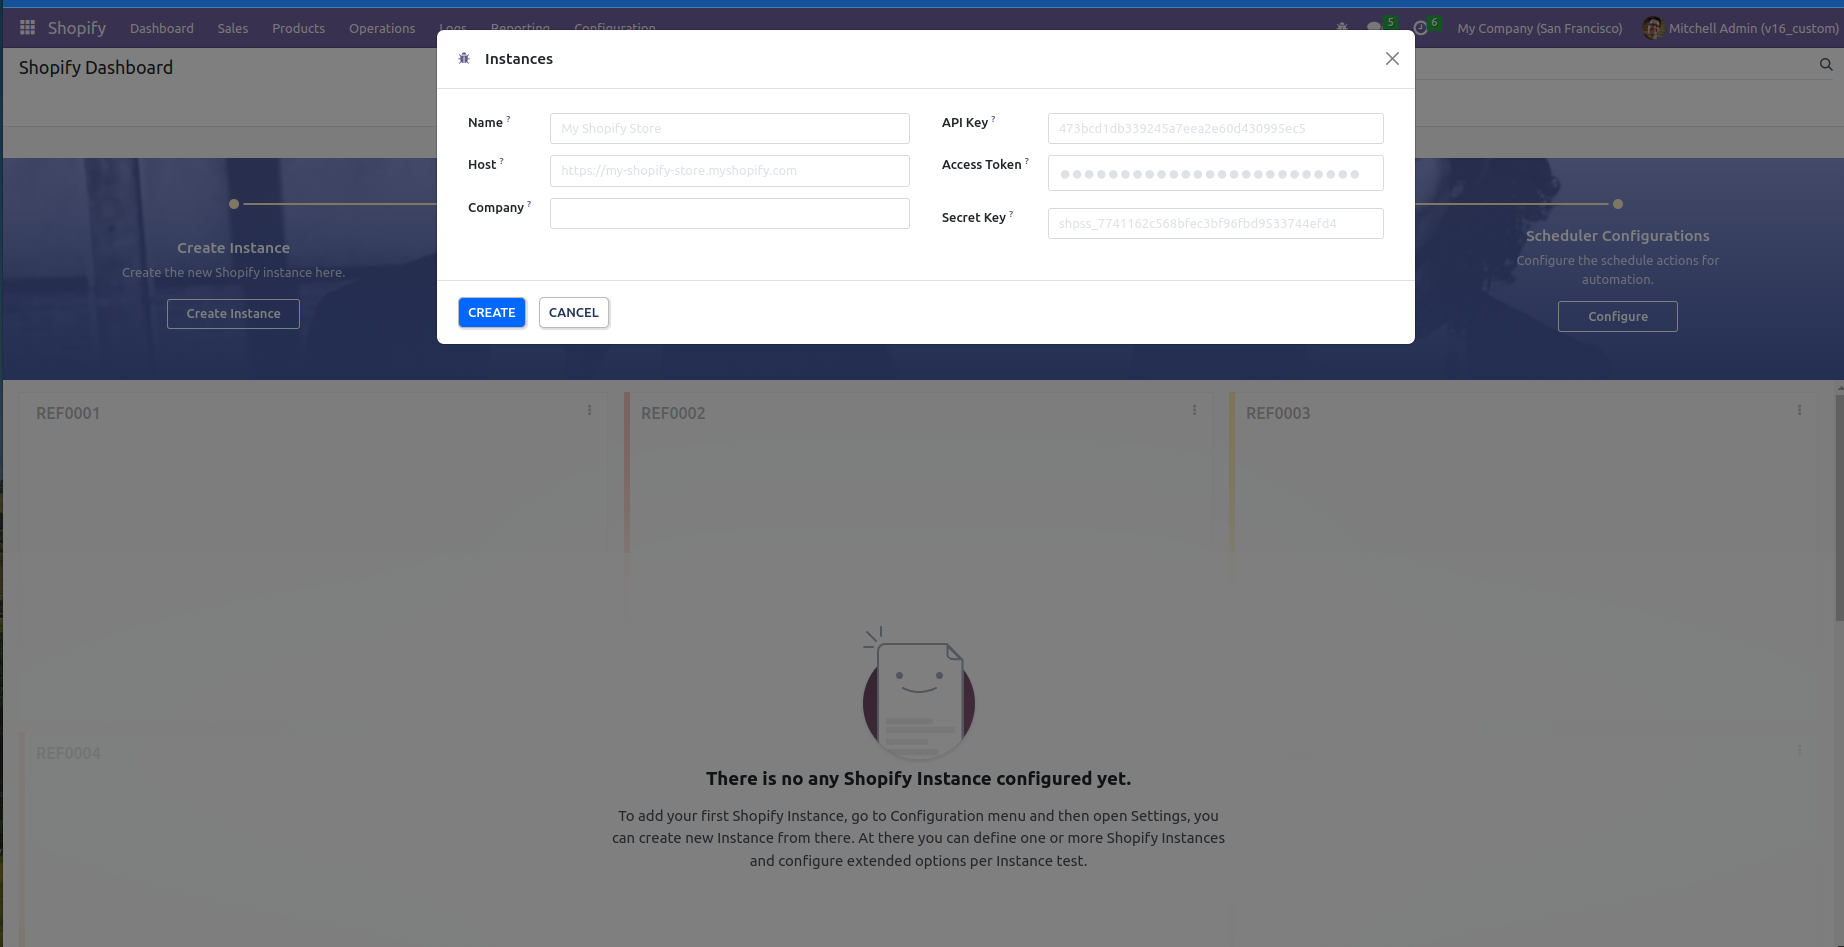 Shopify Odoo Connector